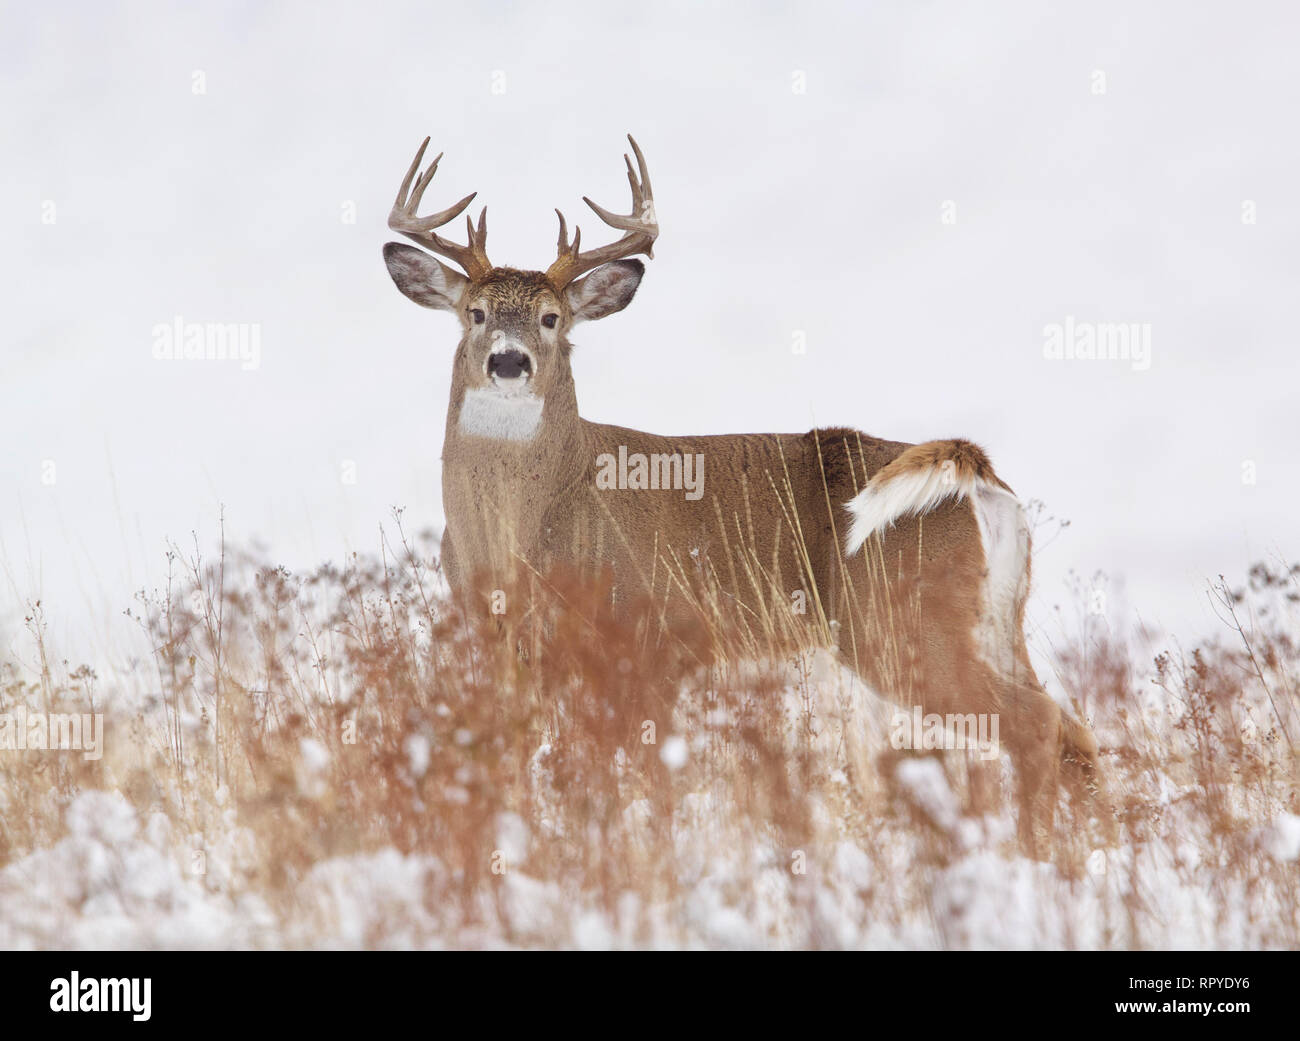 Whitetail Deer buck in a snowy midwestern landscape during deer hunting season Stock Photo